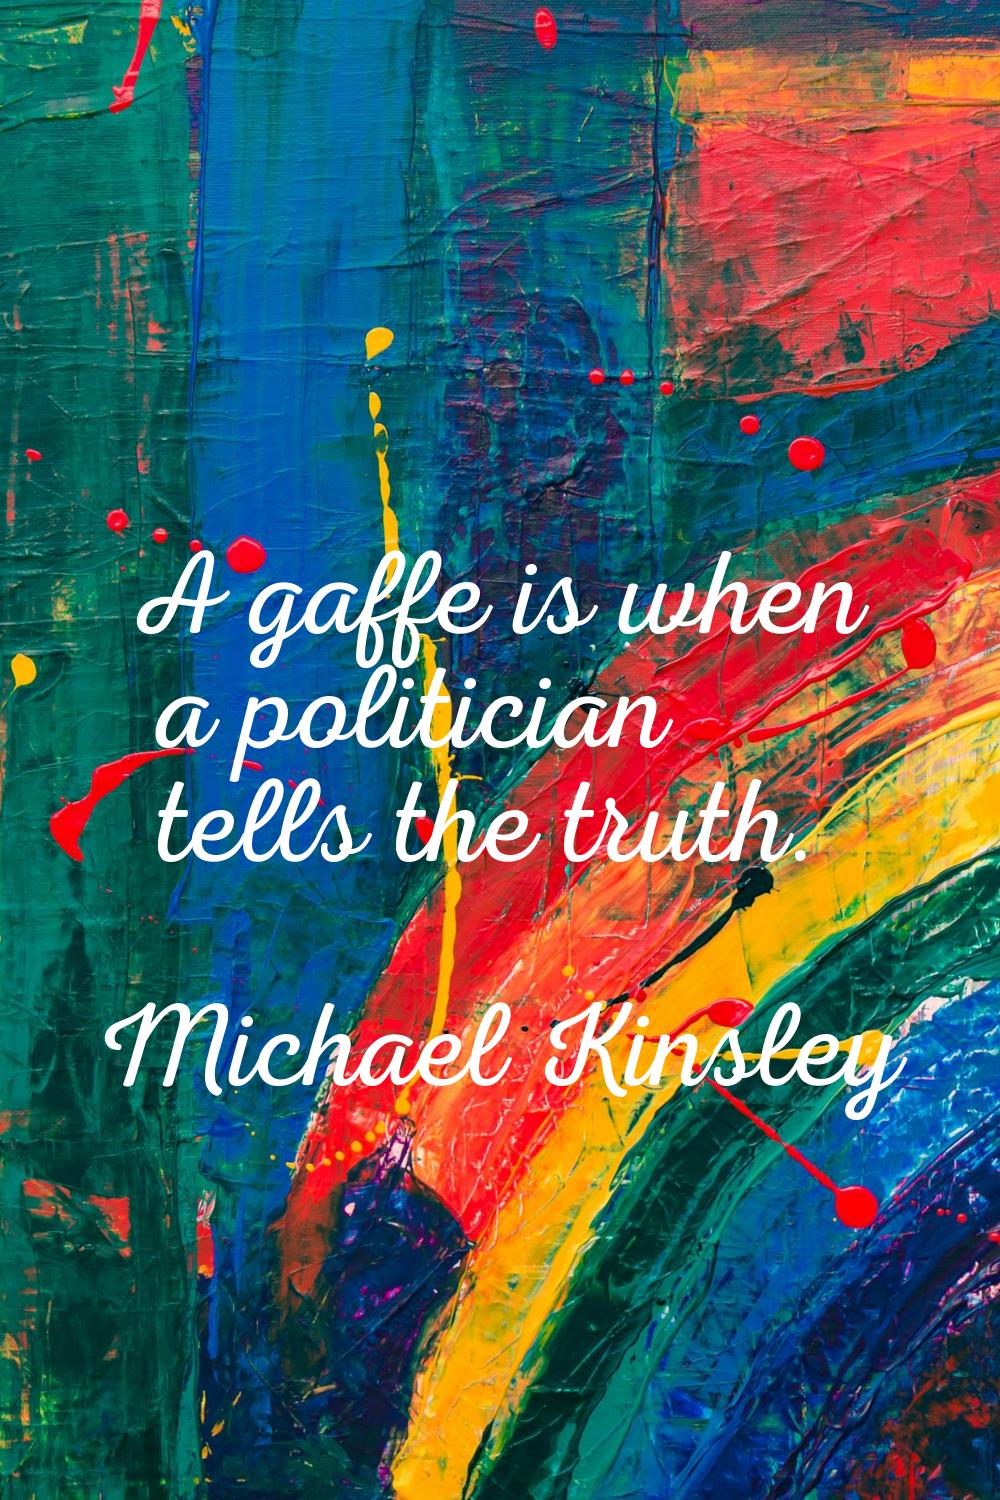 A gaffe is when a politician tells the truth.